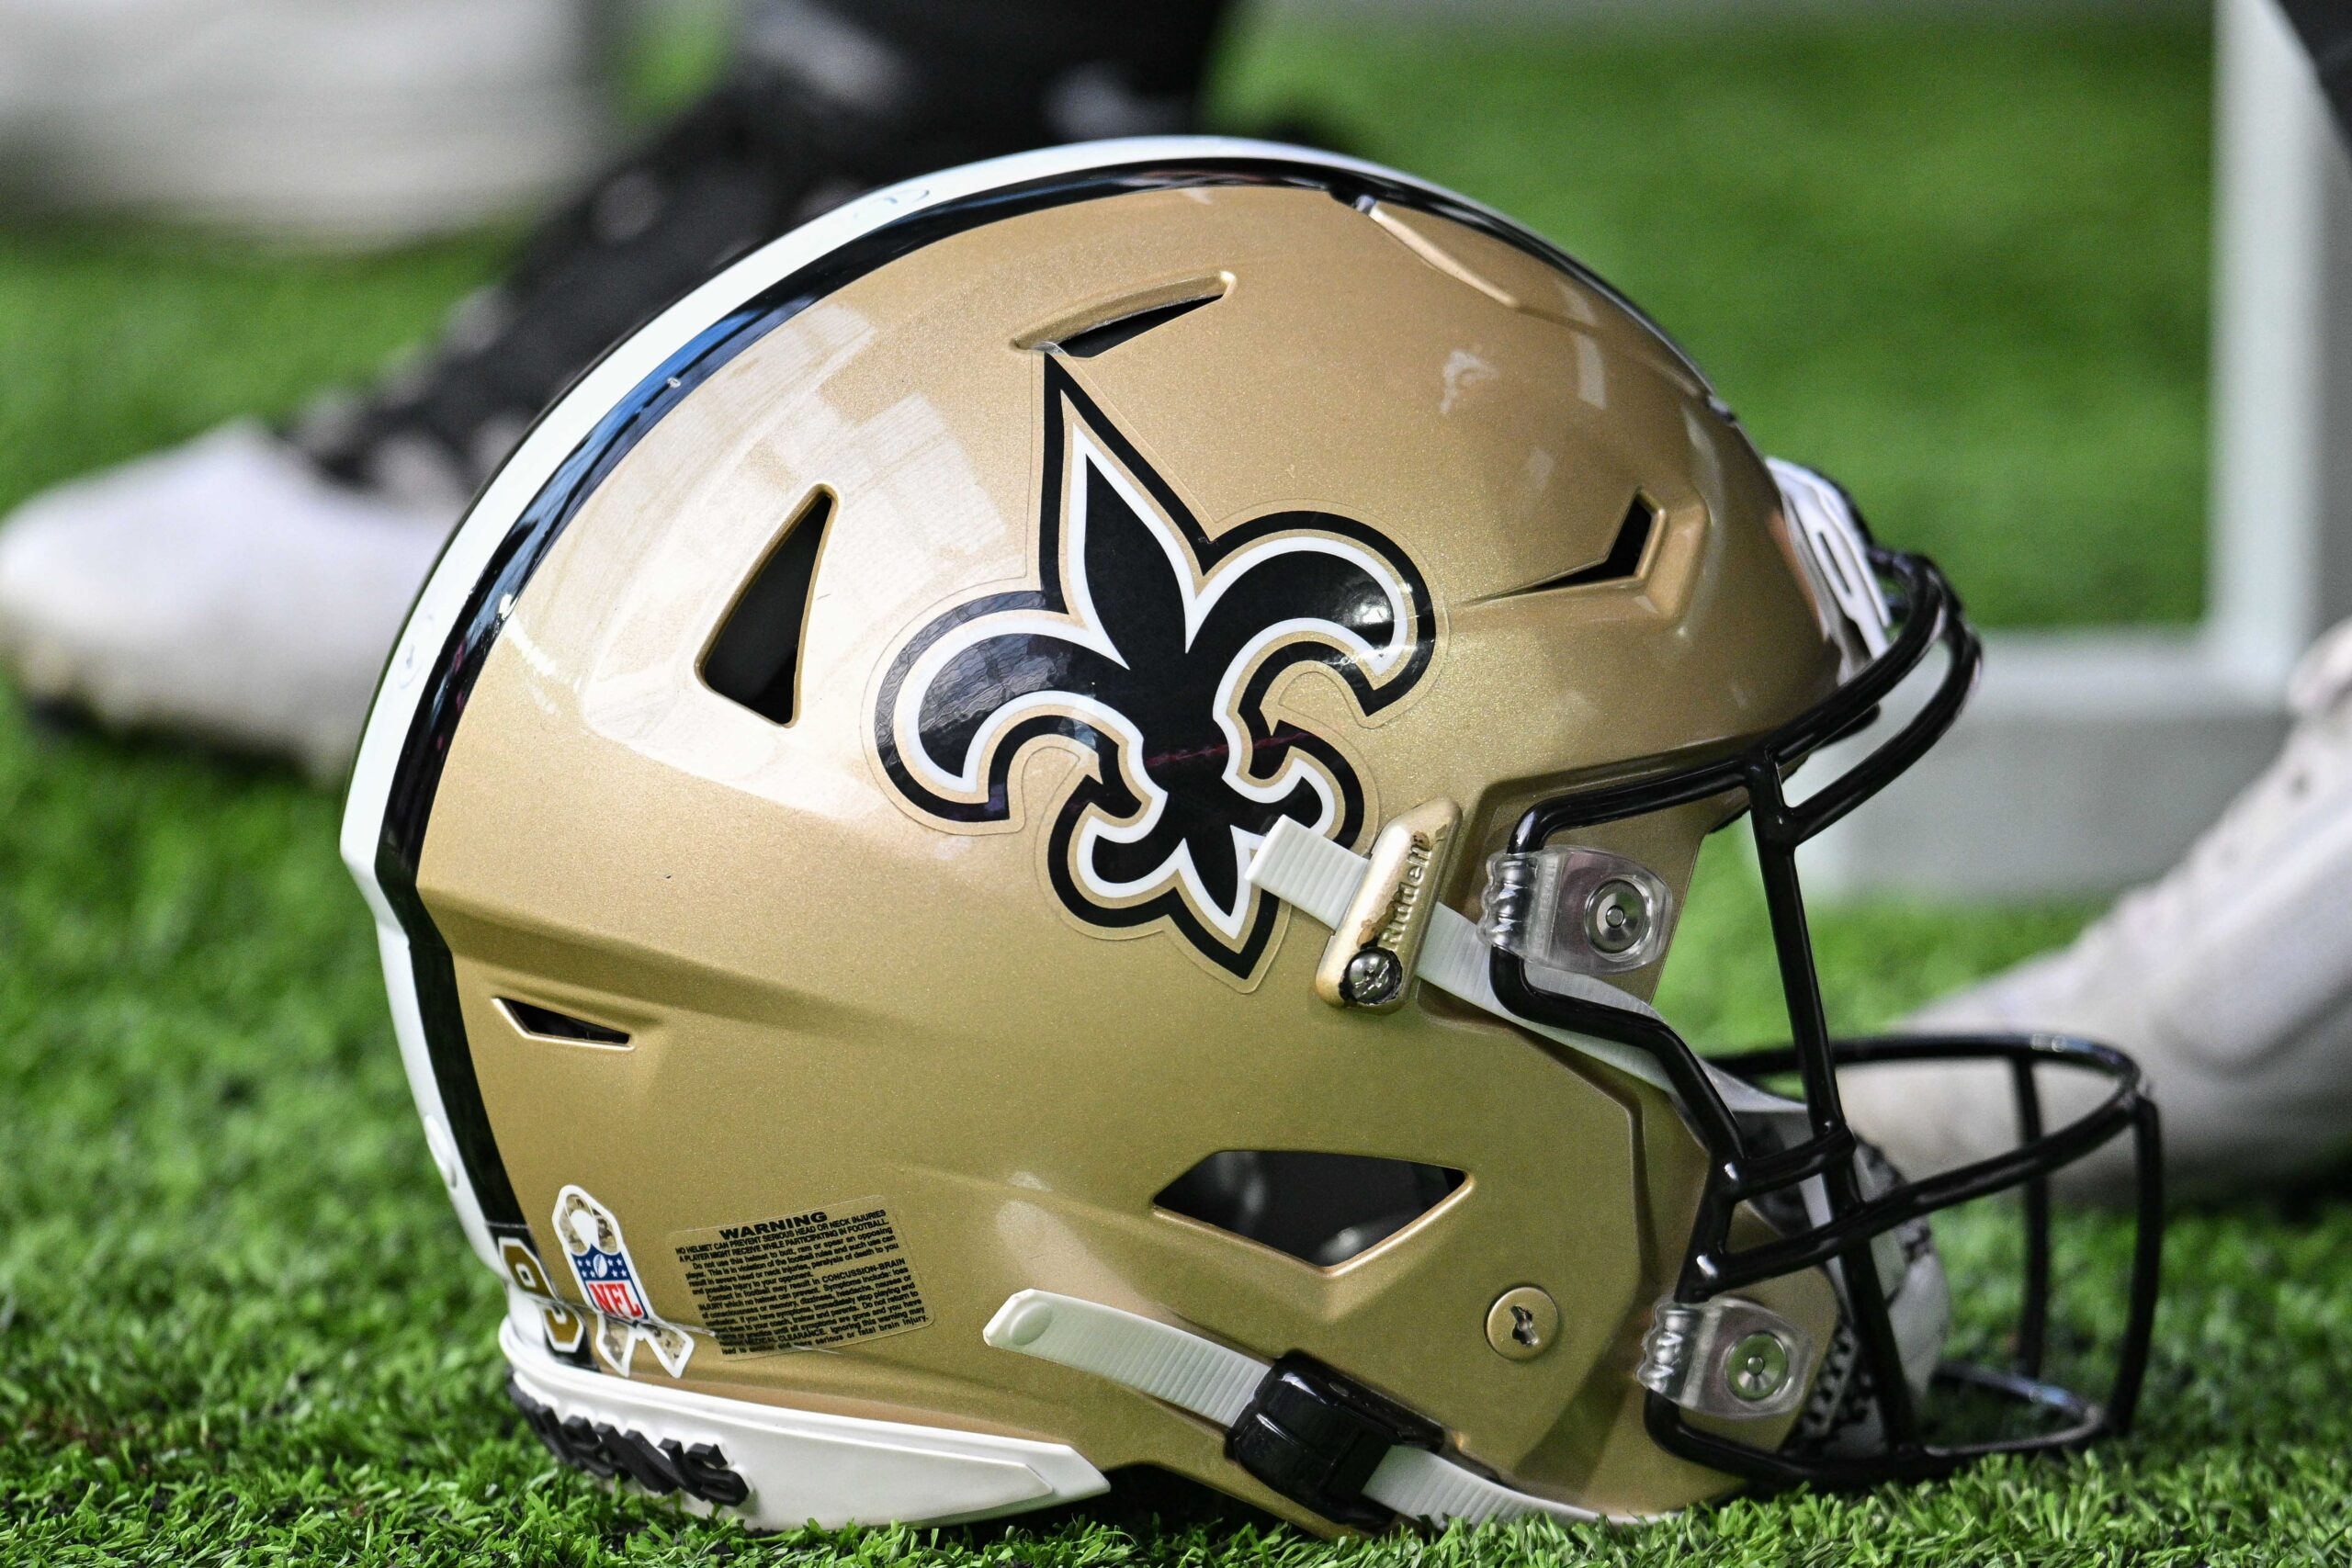 A New Orleans Saints helmet during the game between the Minnesota Vikings and the New Orleans Saints at U.S. Bank Stadium.